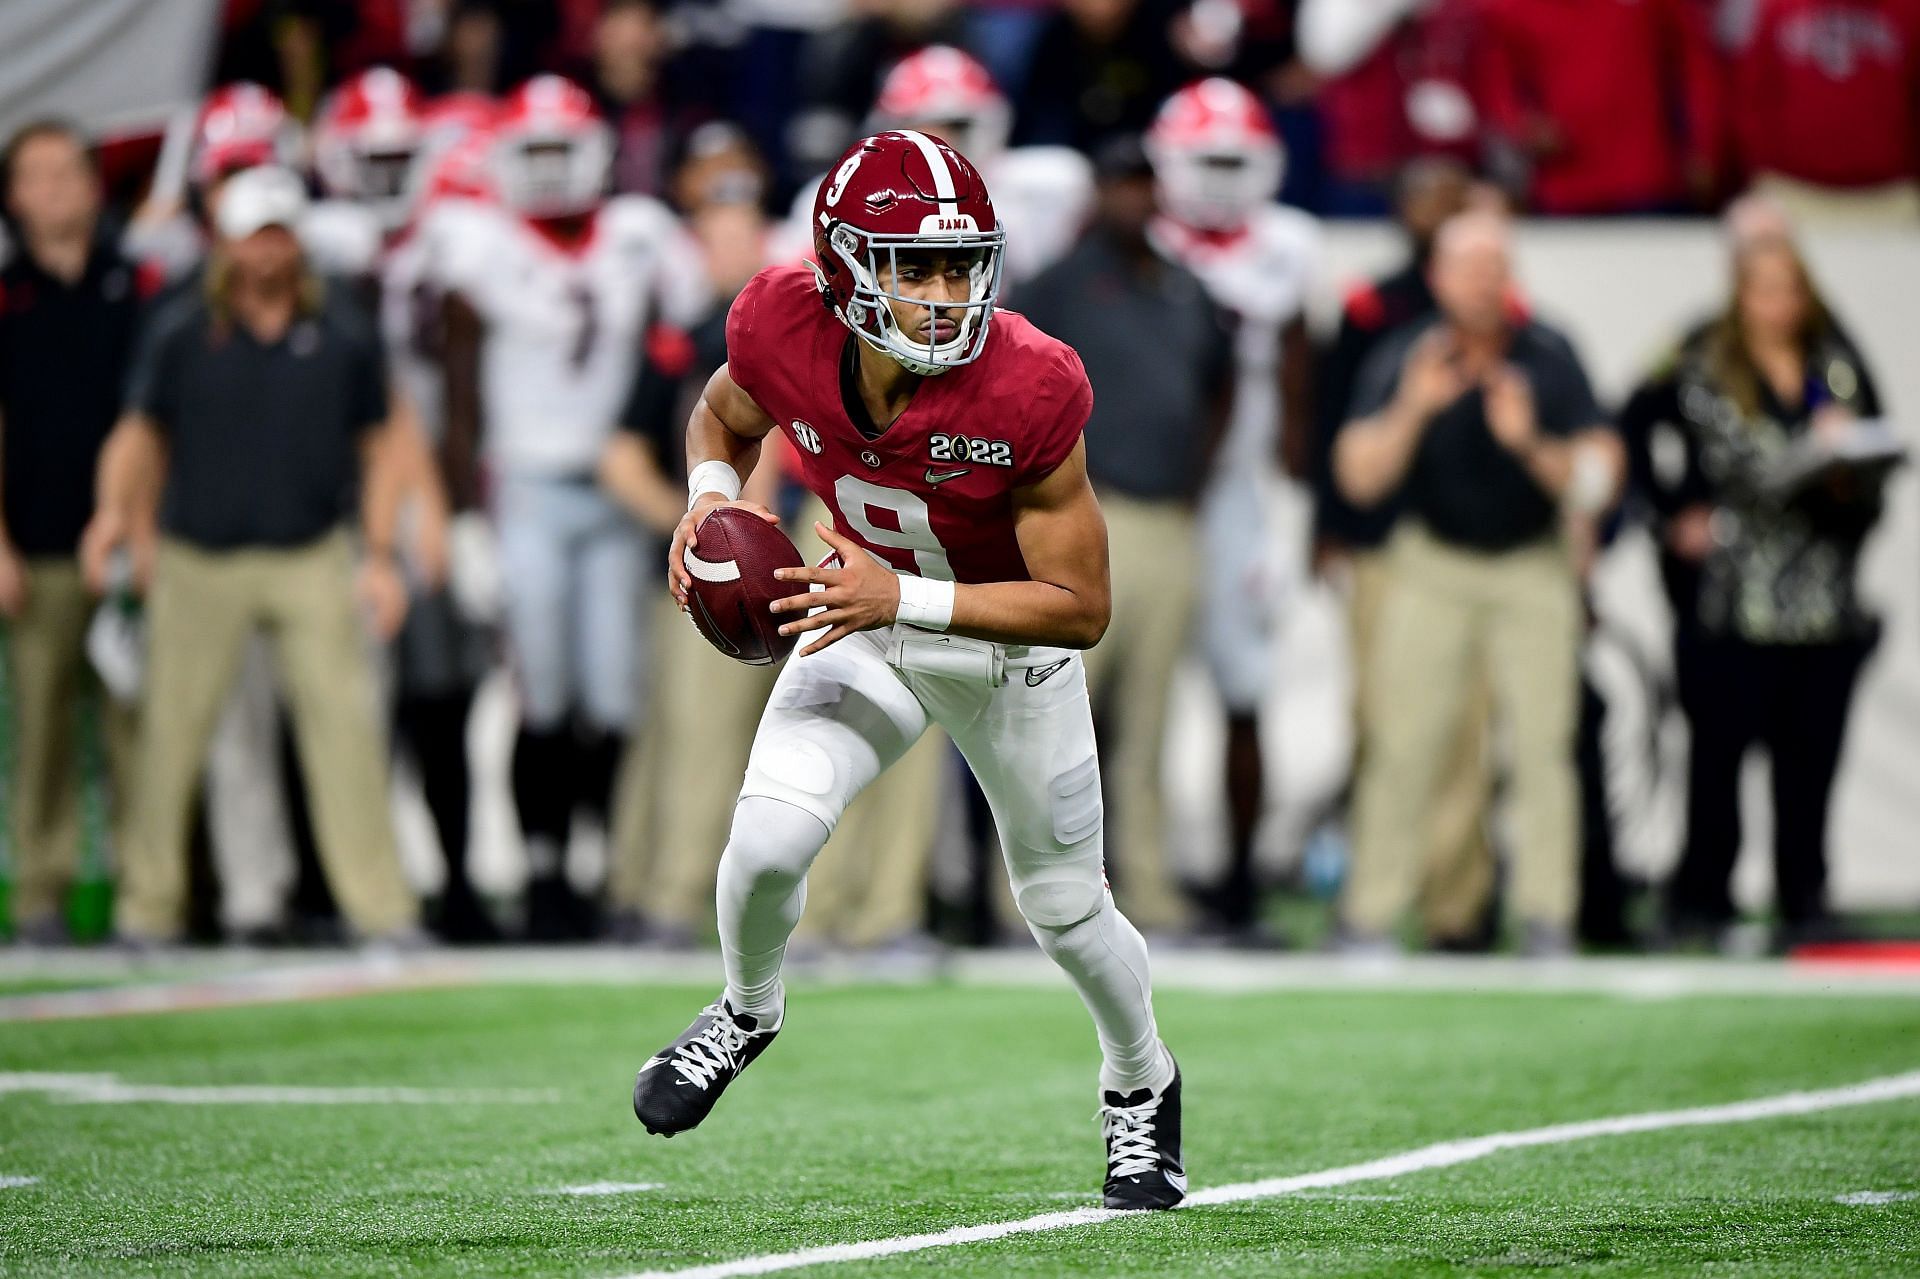 2021 Heisman winner Bryce Young could become a top pick in the 2023 NFL Draft